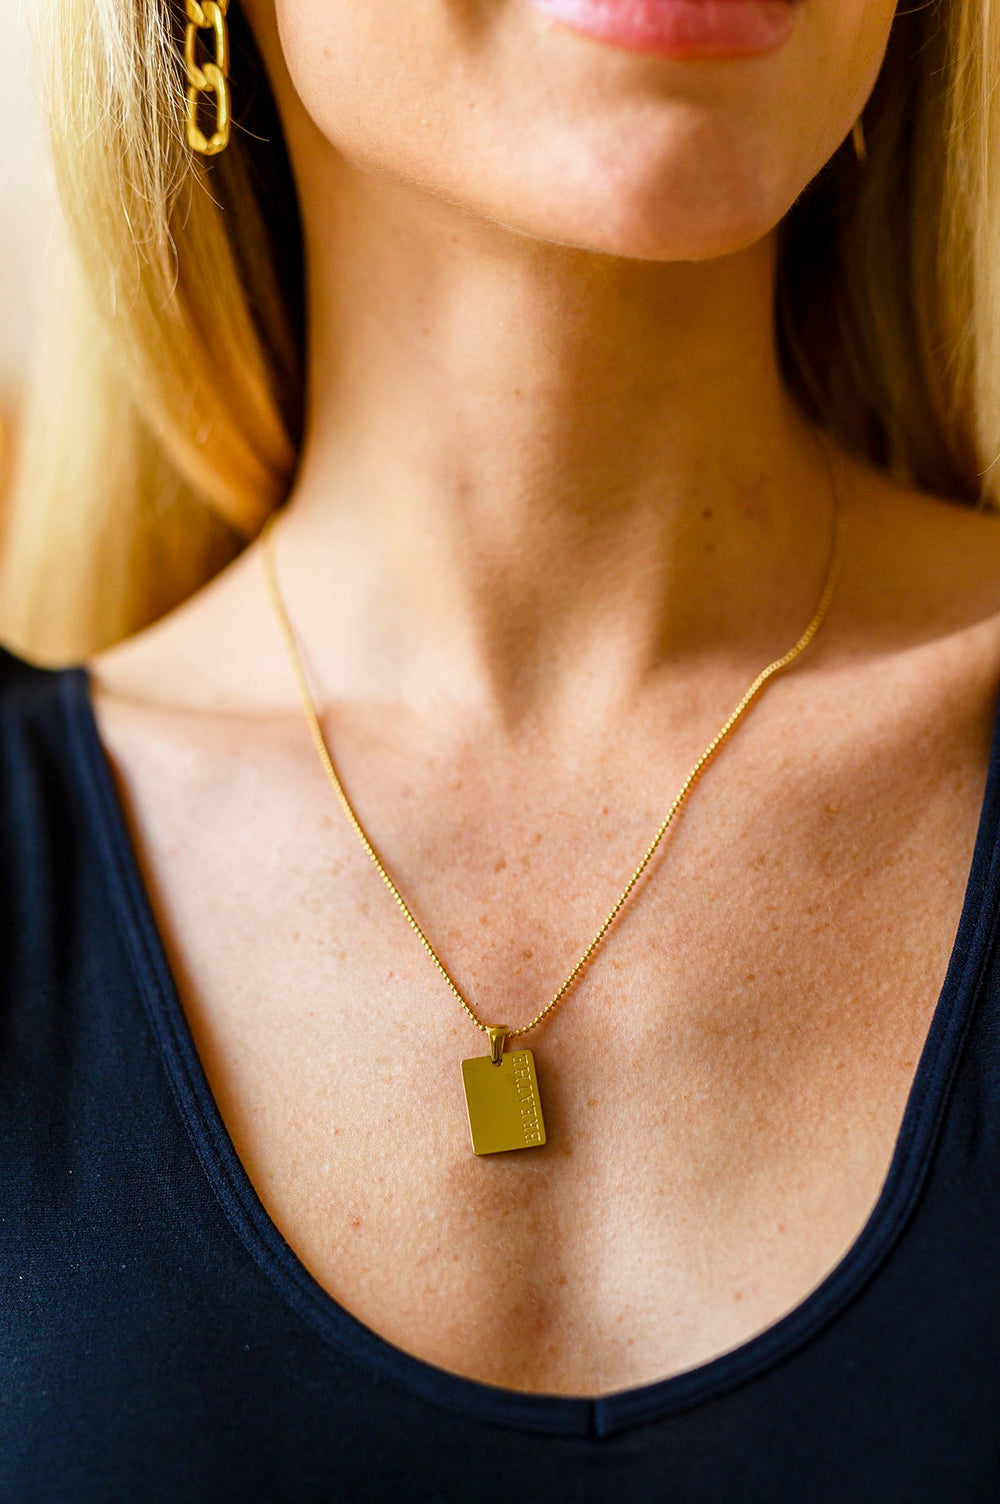 Women's Fashion Pendent | Pendent Necklace | MyTrendyTees